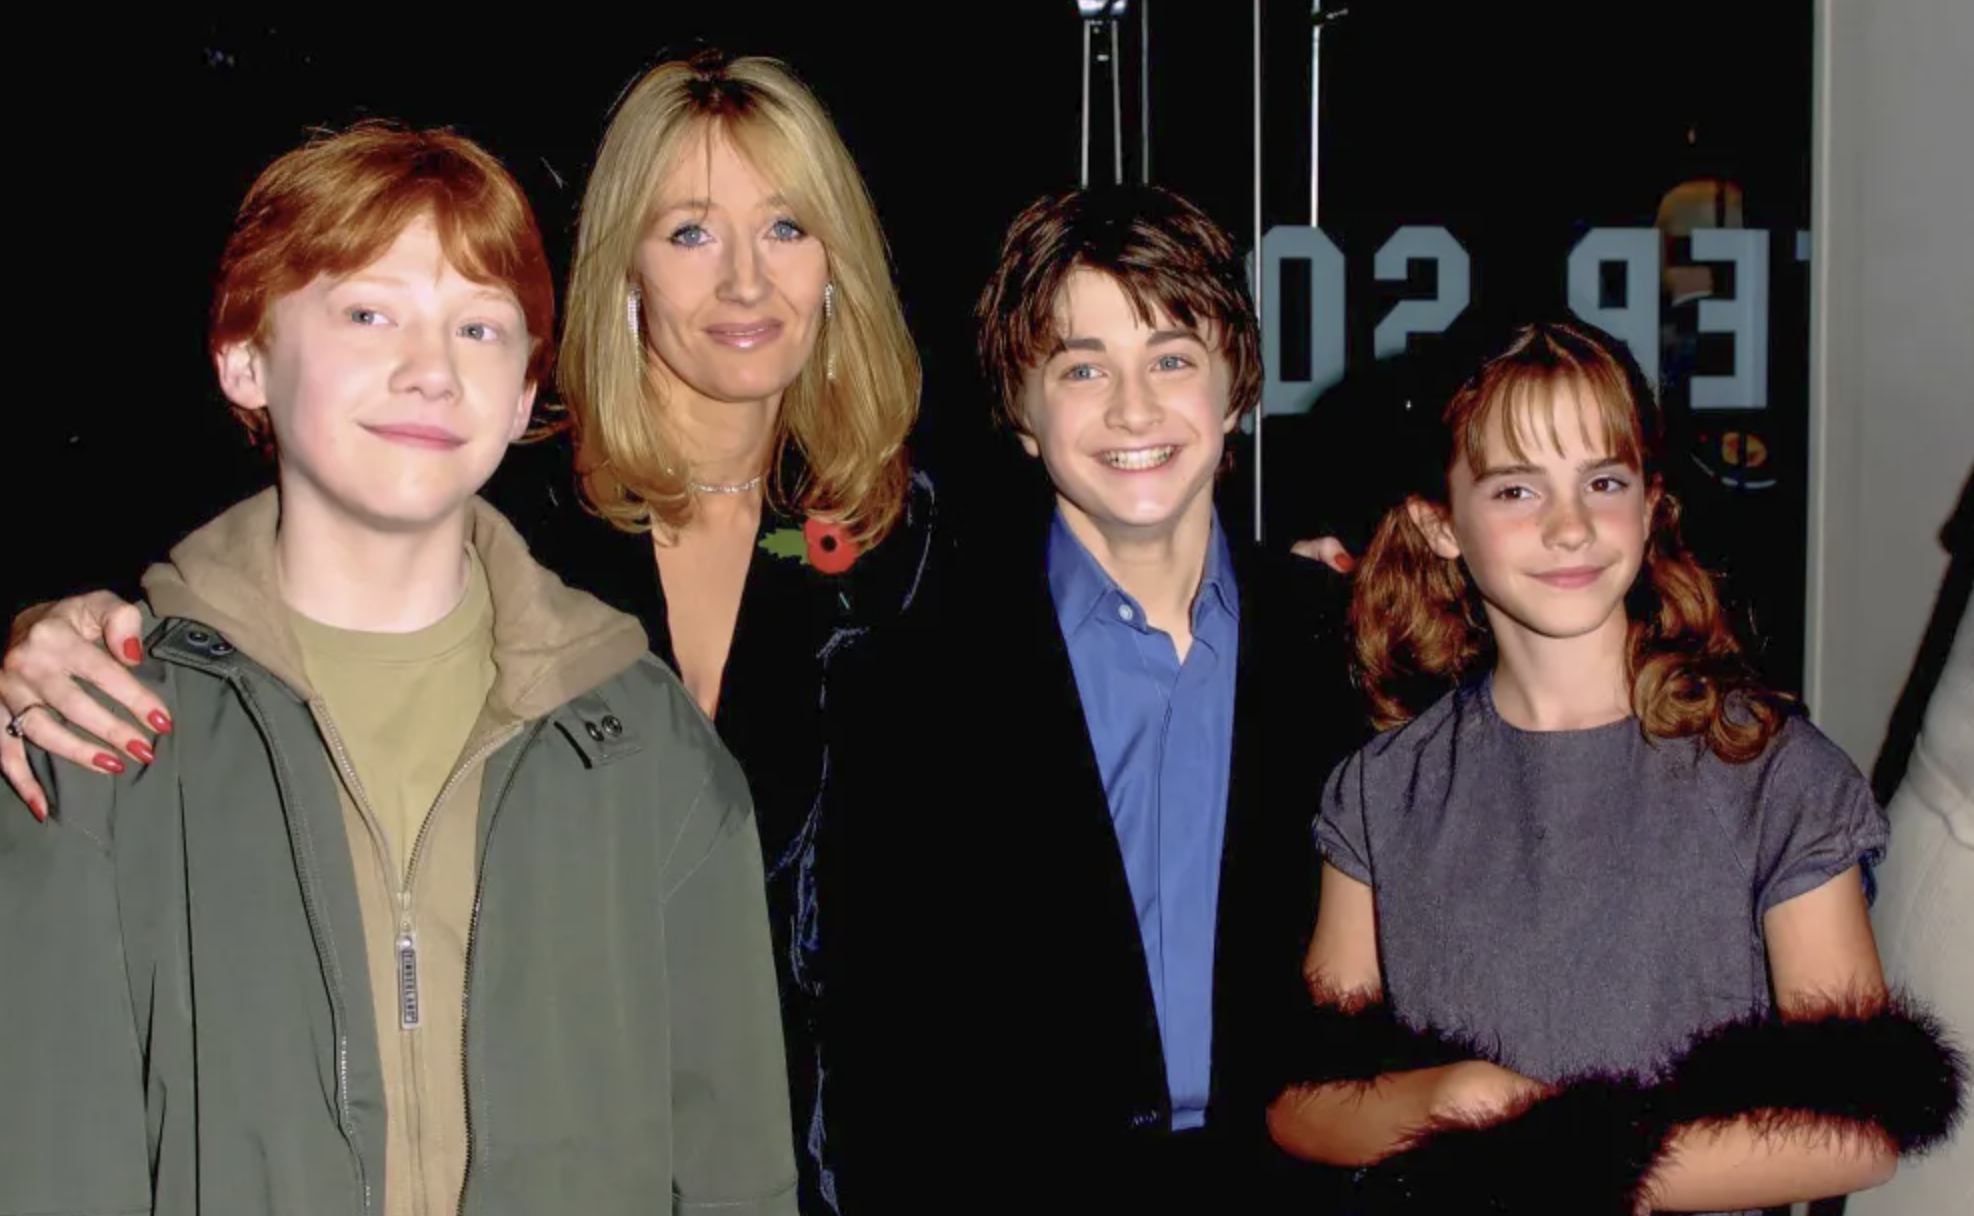 J.K. Rowling Critiques Daniel Radcliffe, Emma Watson, and Other Stars for Endorsing Transgender Rights.